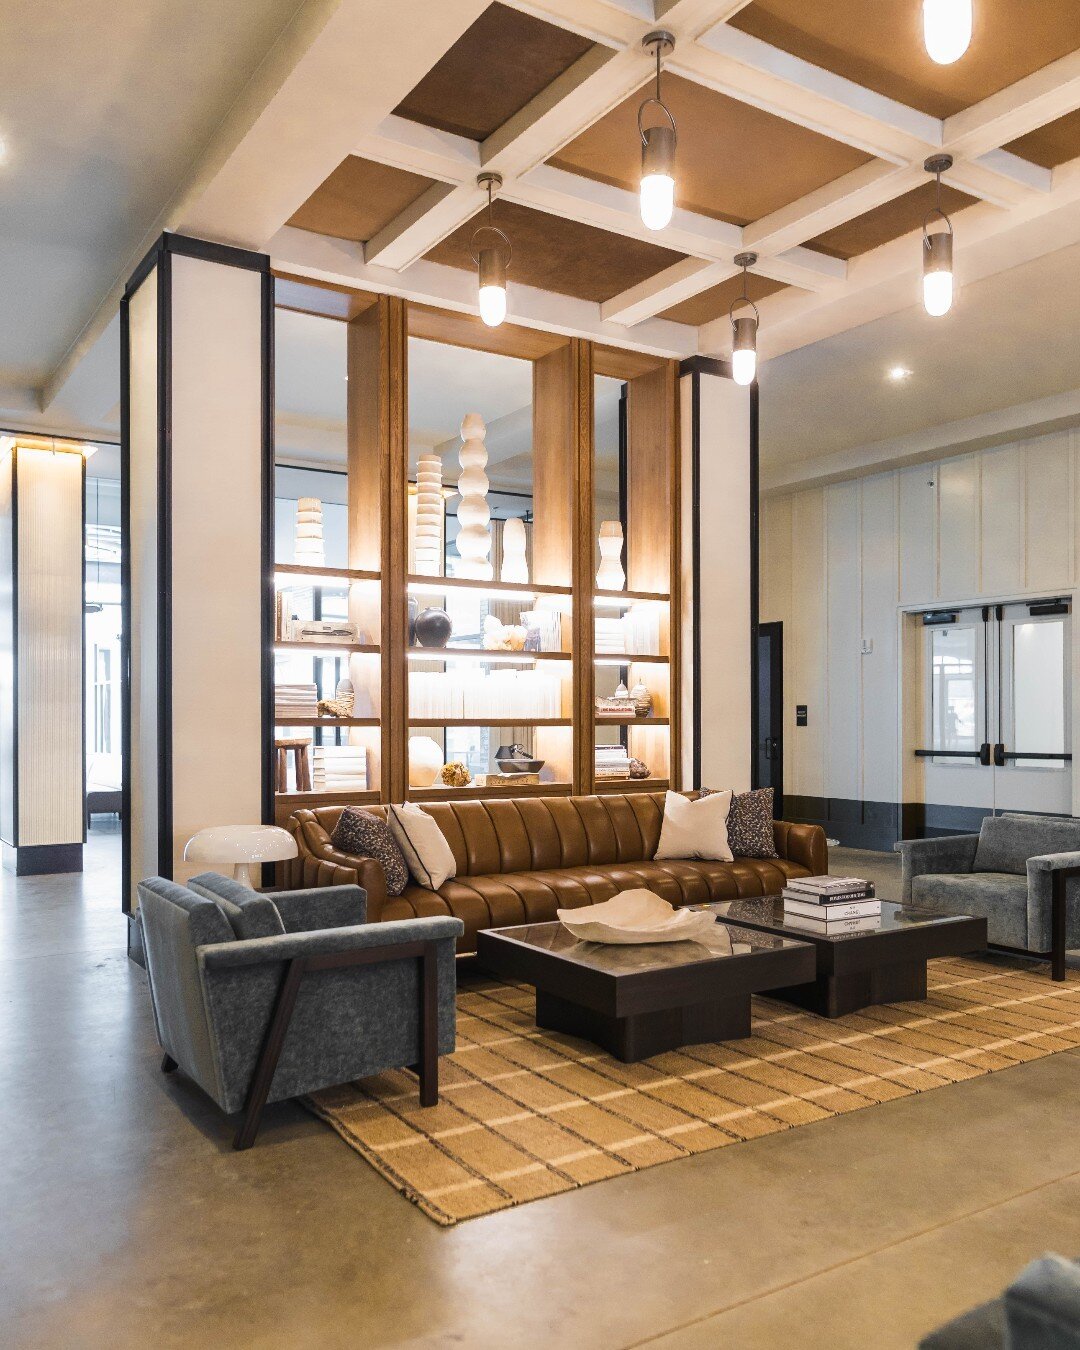 At Westside Paper, hospitality is at the center of all we do. We designed our lobby with comfort in mind so that all guests feel welcome and right at home!